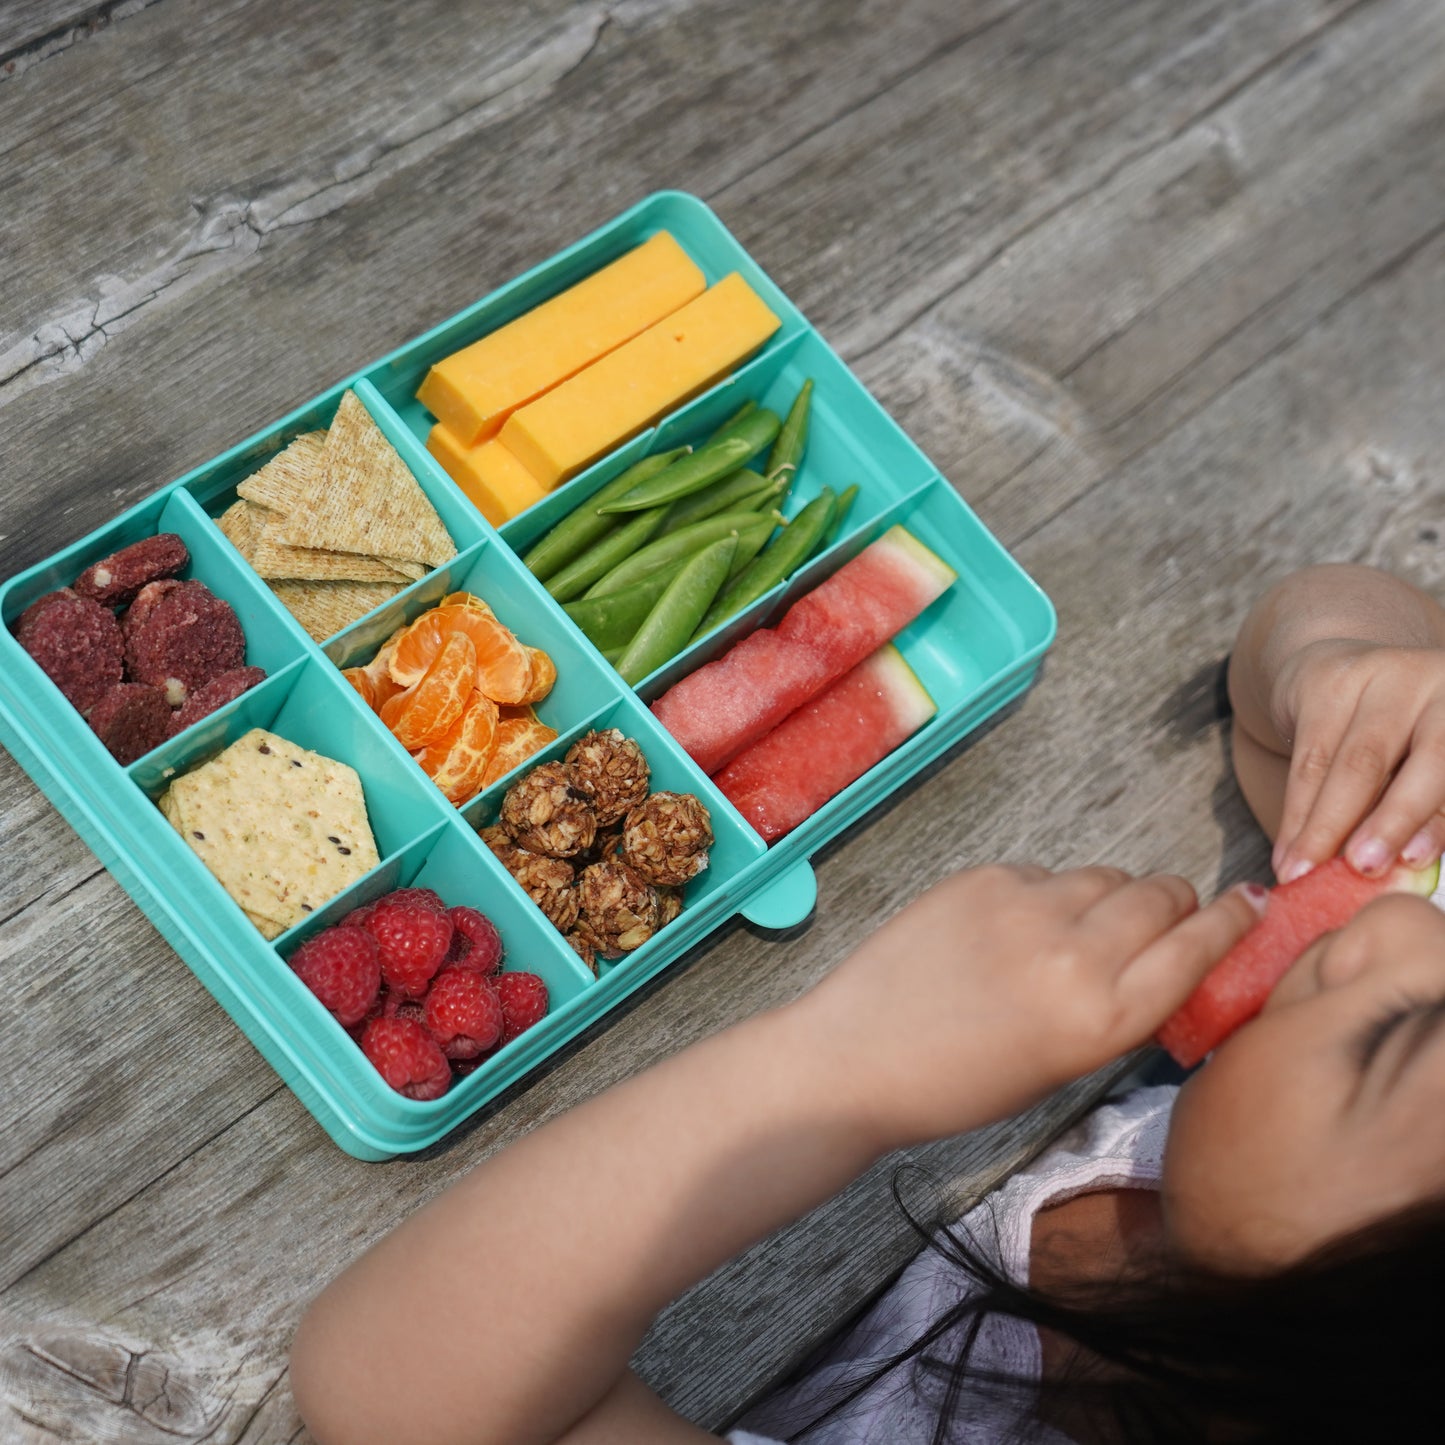 melii Snackle Box Turquoise - 12 Compartment Snack Container with Removable Dividers for Customizable Storage - Ideal for On the Go Snacking, BPA Free, Easy to Open and Clean